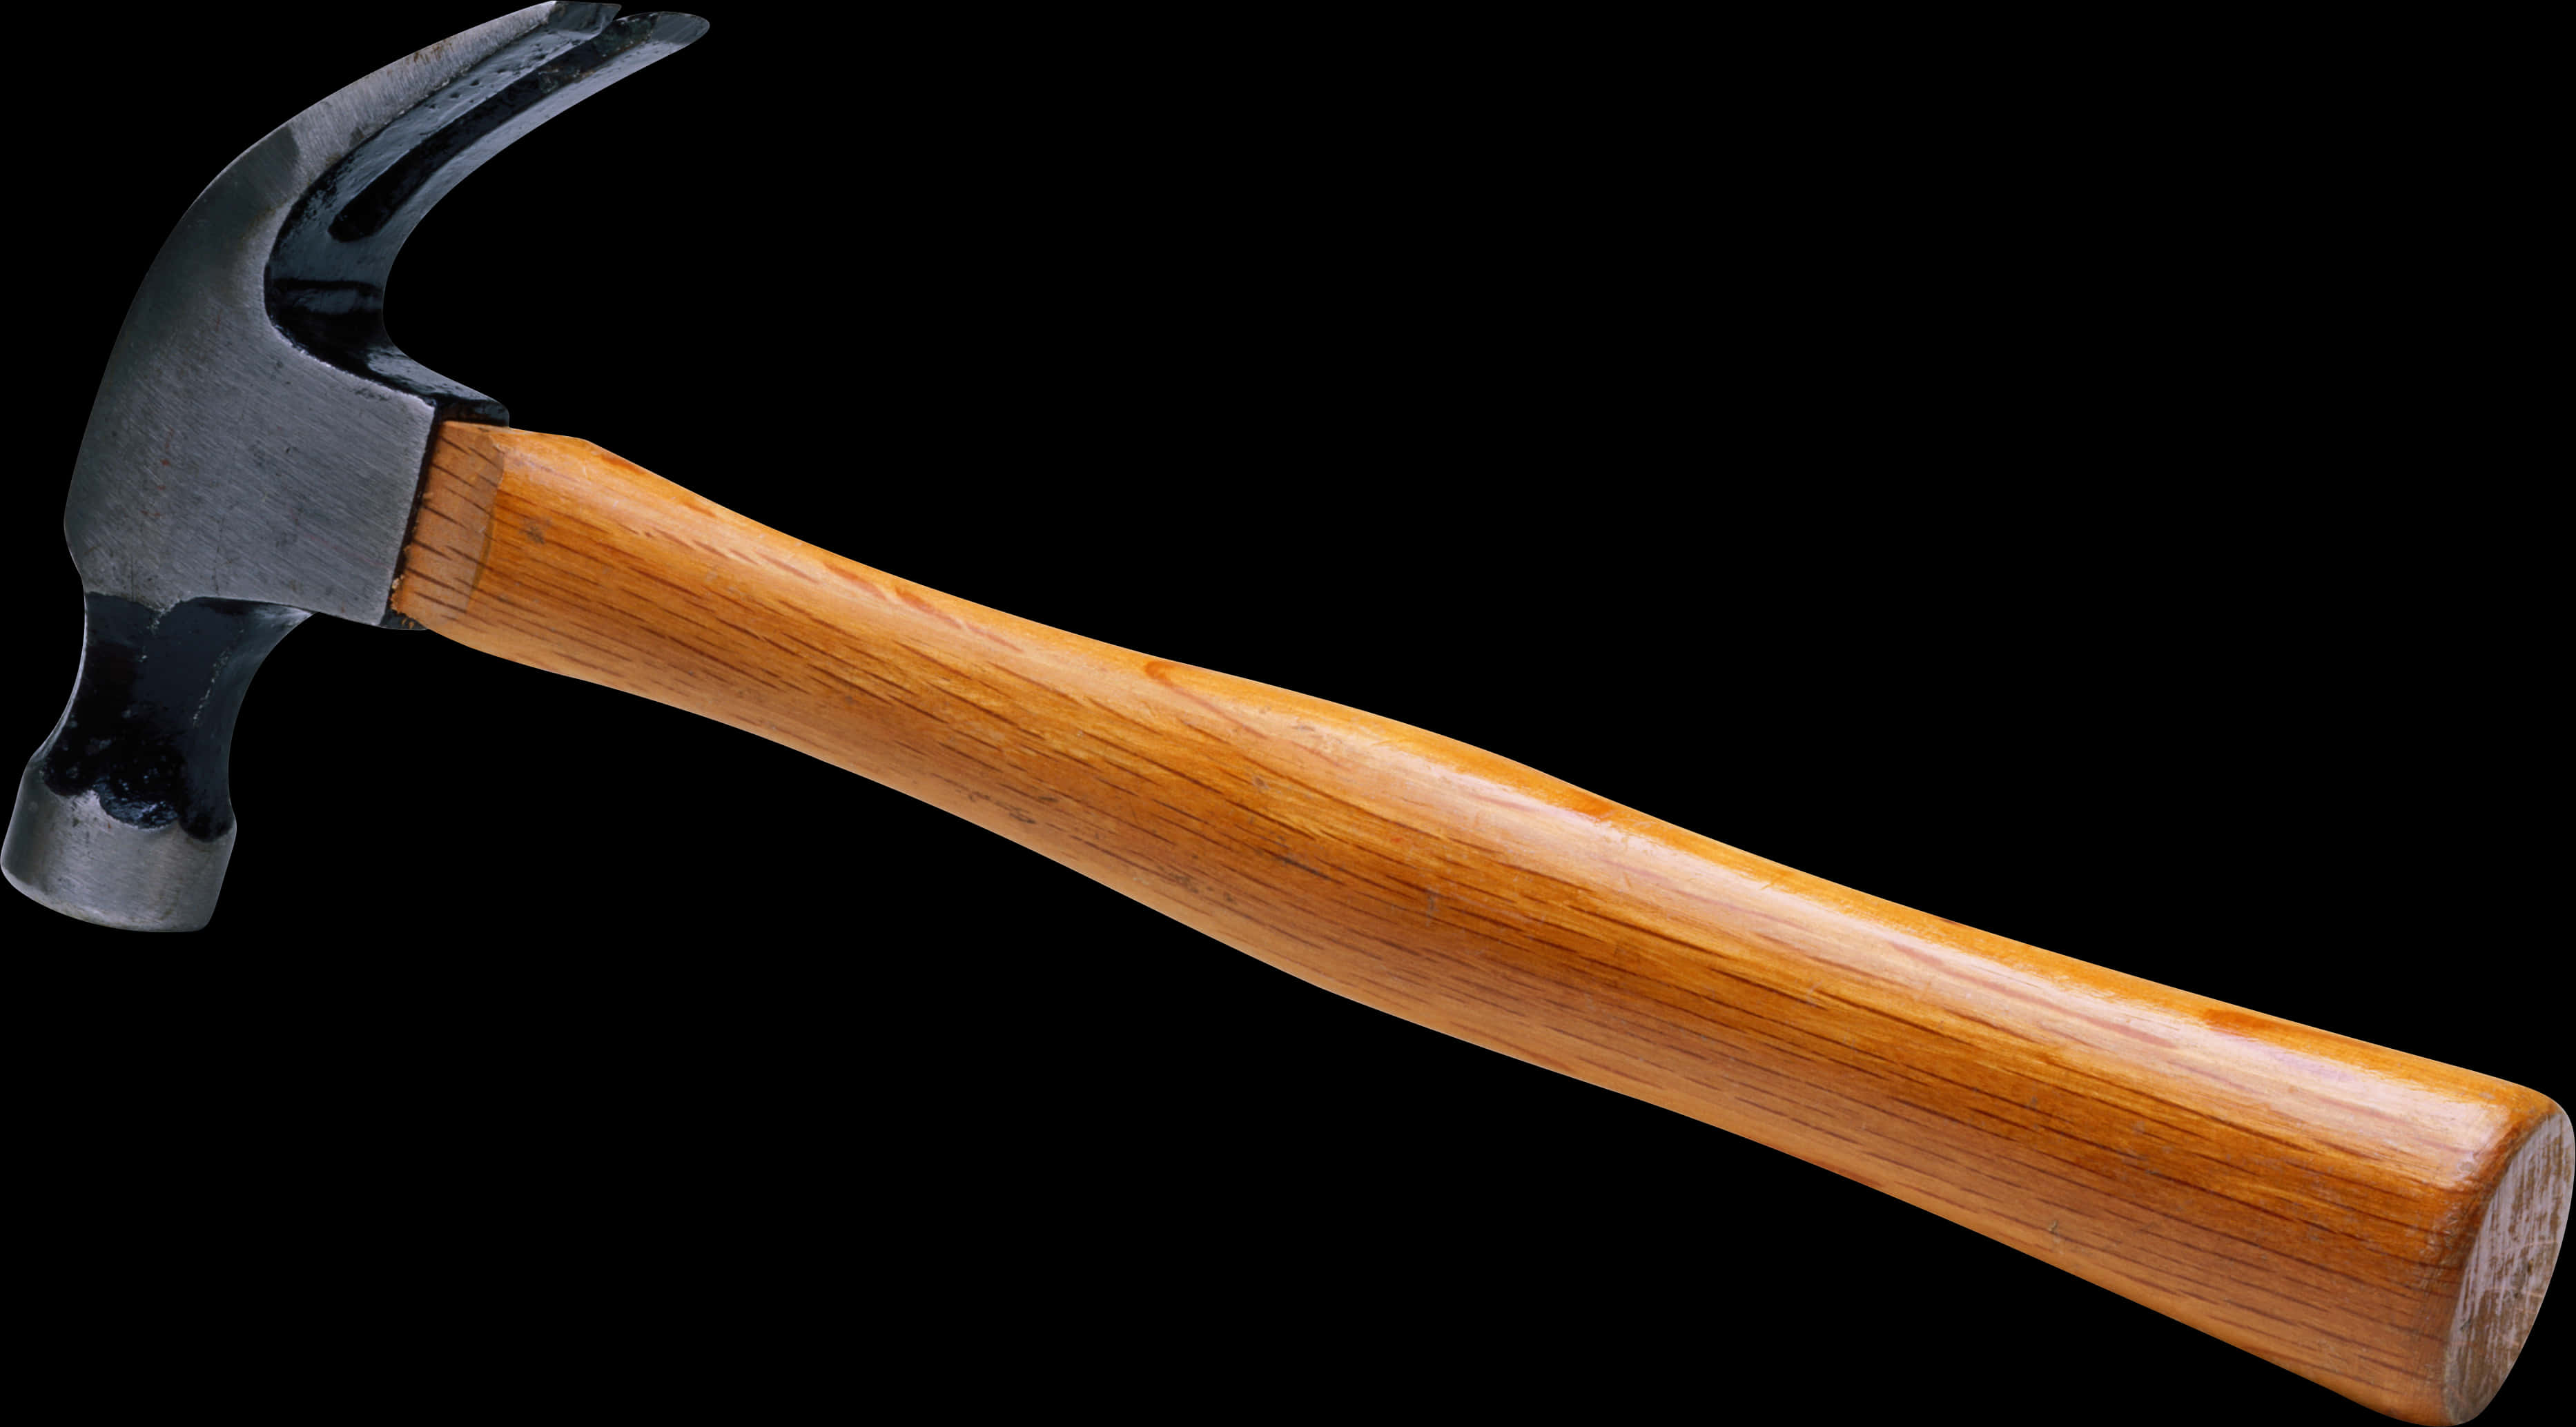 A Hammer With A Wooden Handle